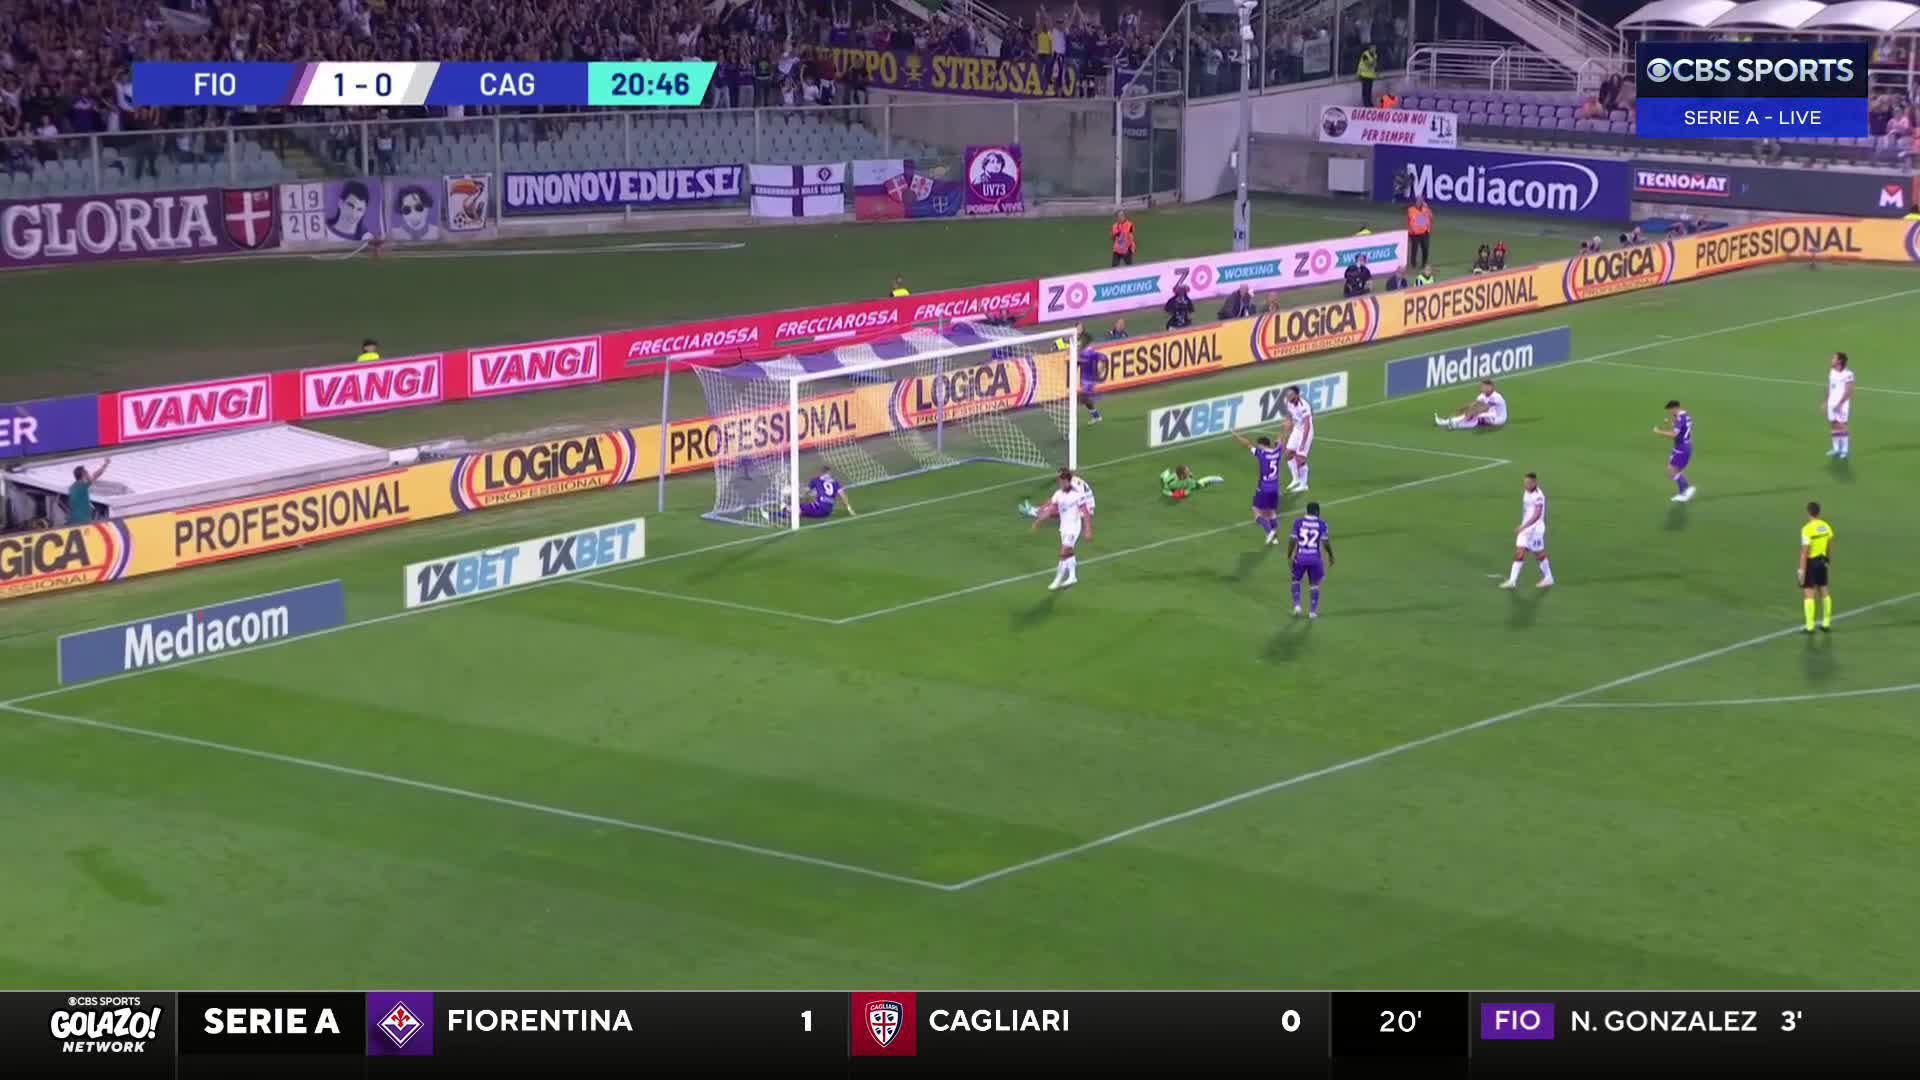 An unfortunate deflection from Alberto Dossena helps Fiorentina double their lead. 🫠Stream the game for FREE on CBS Sports Golazo Network available on the @CBSSports App and @PlutoTV. 📲